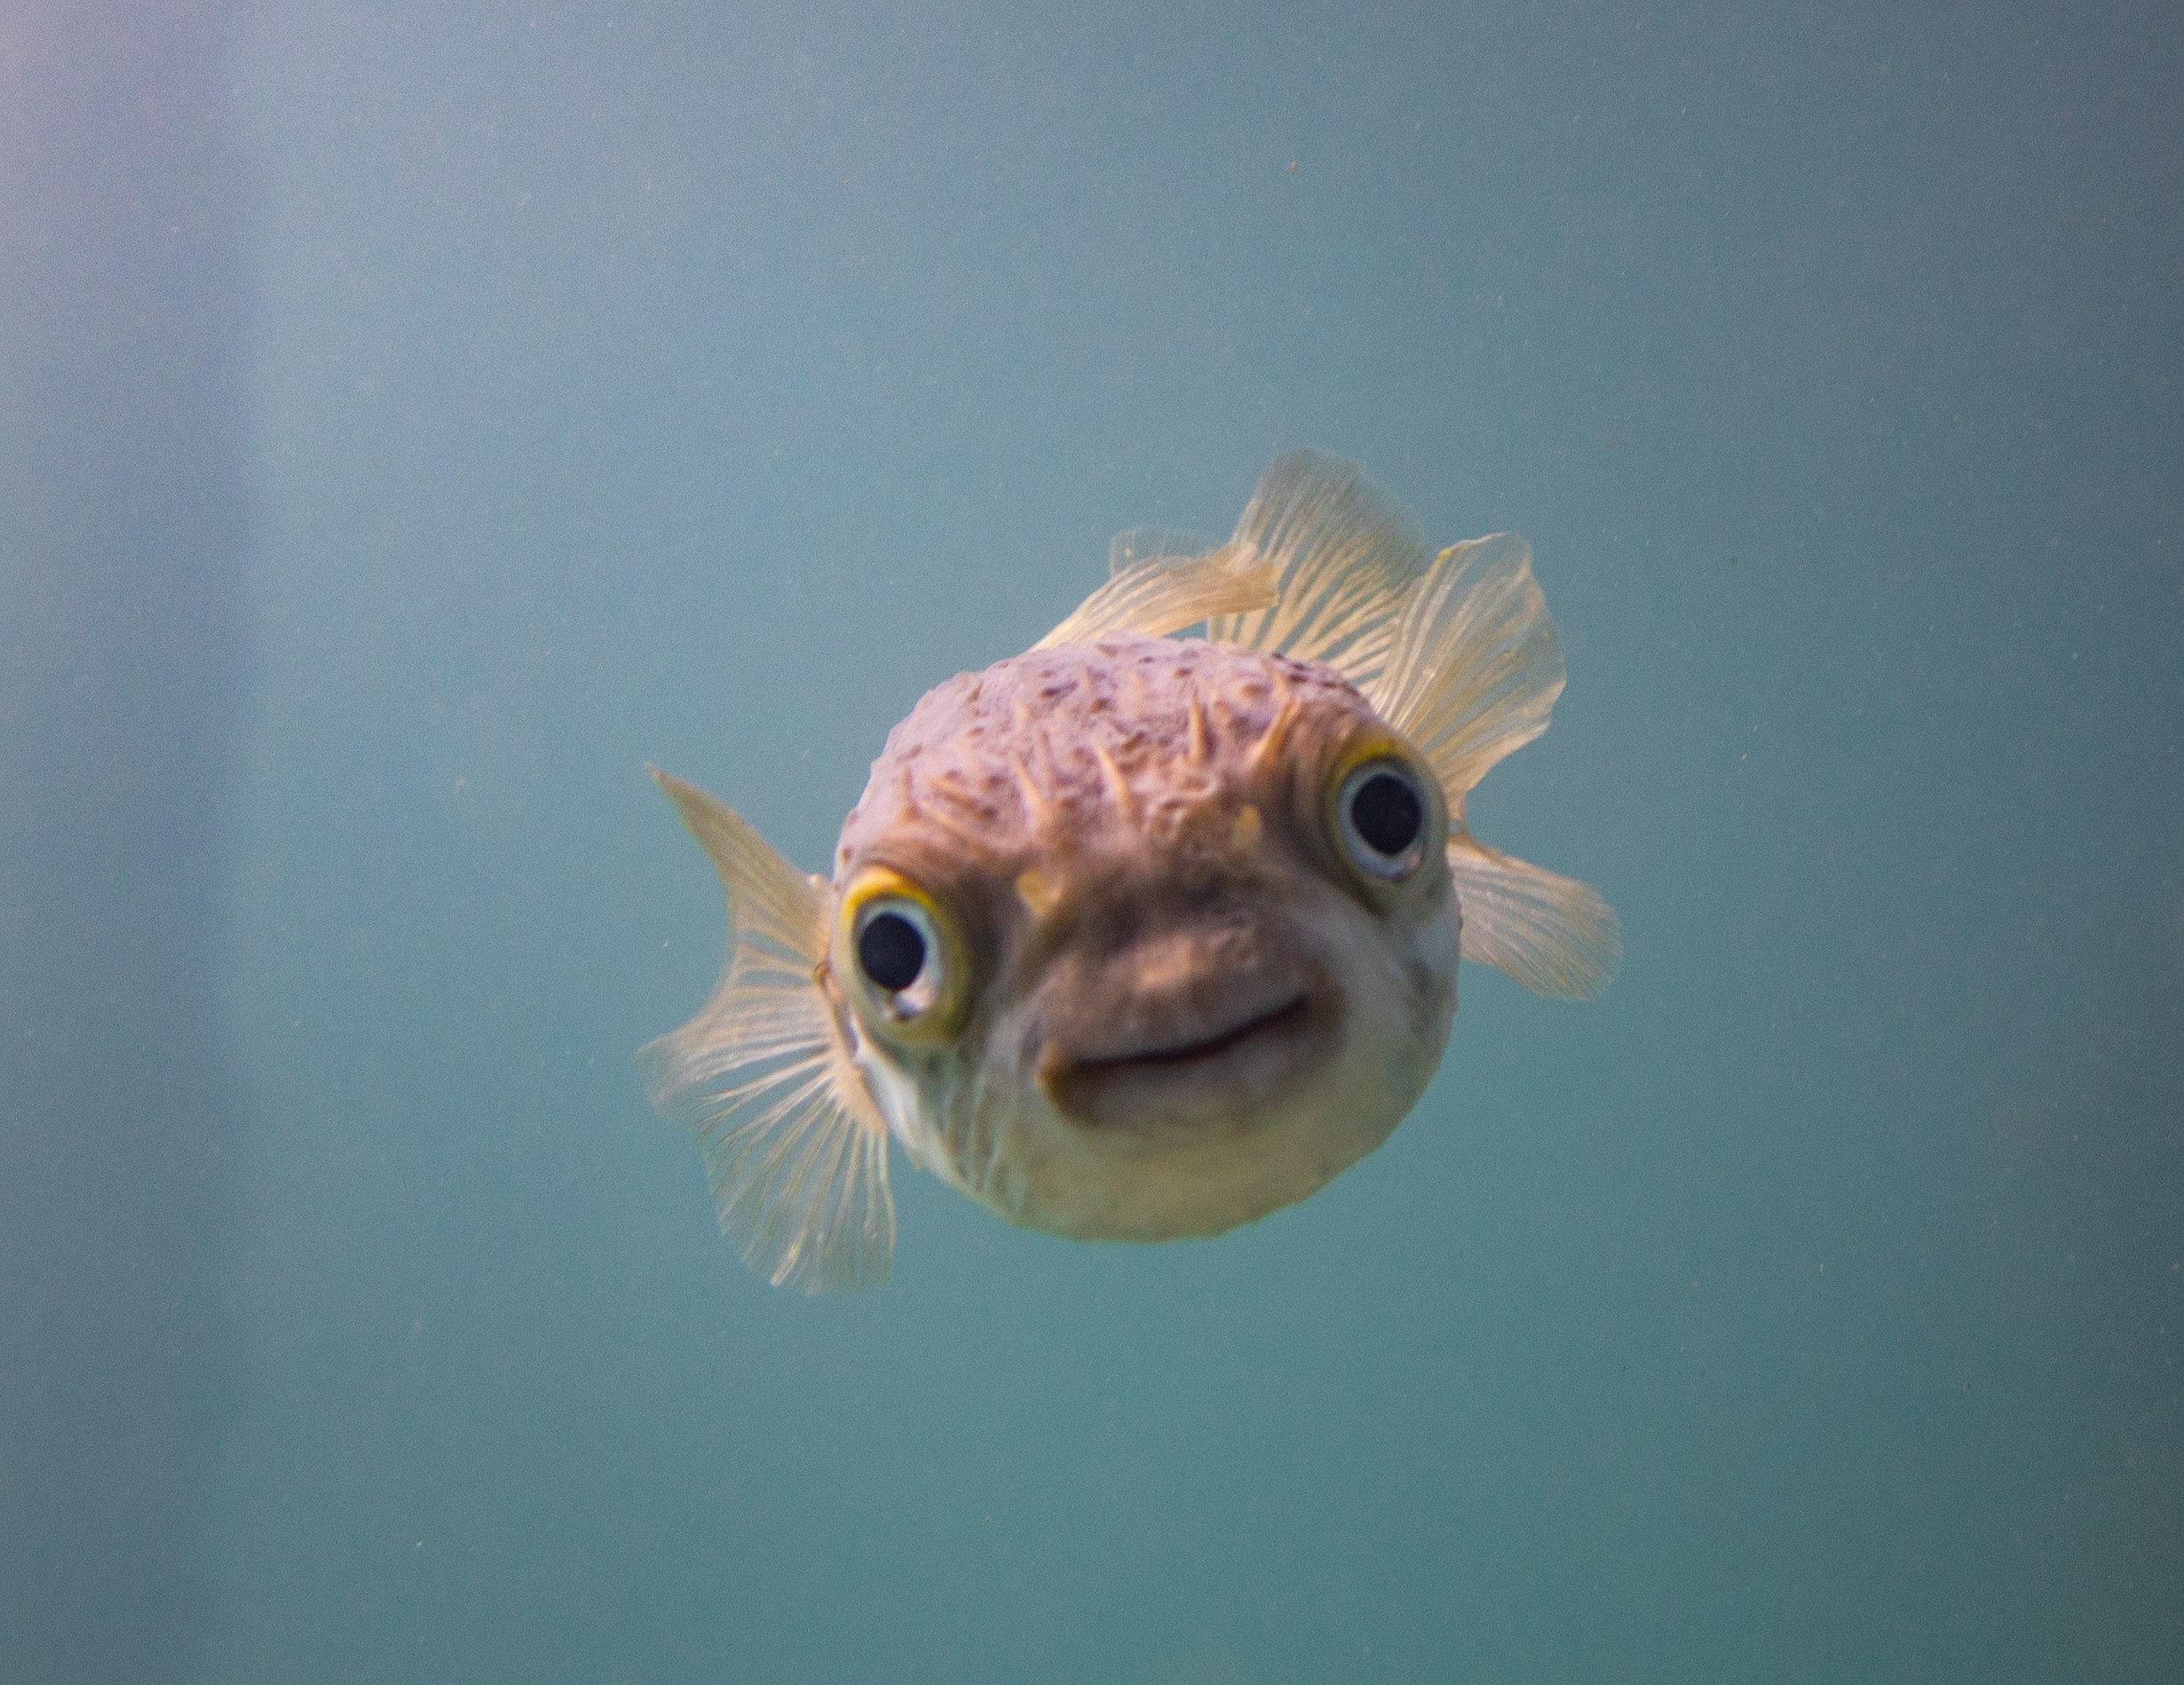 Image of a pufferfish, front and center staring at the camera